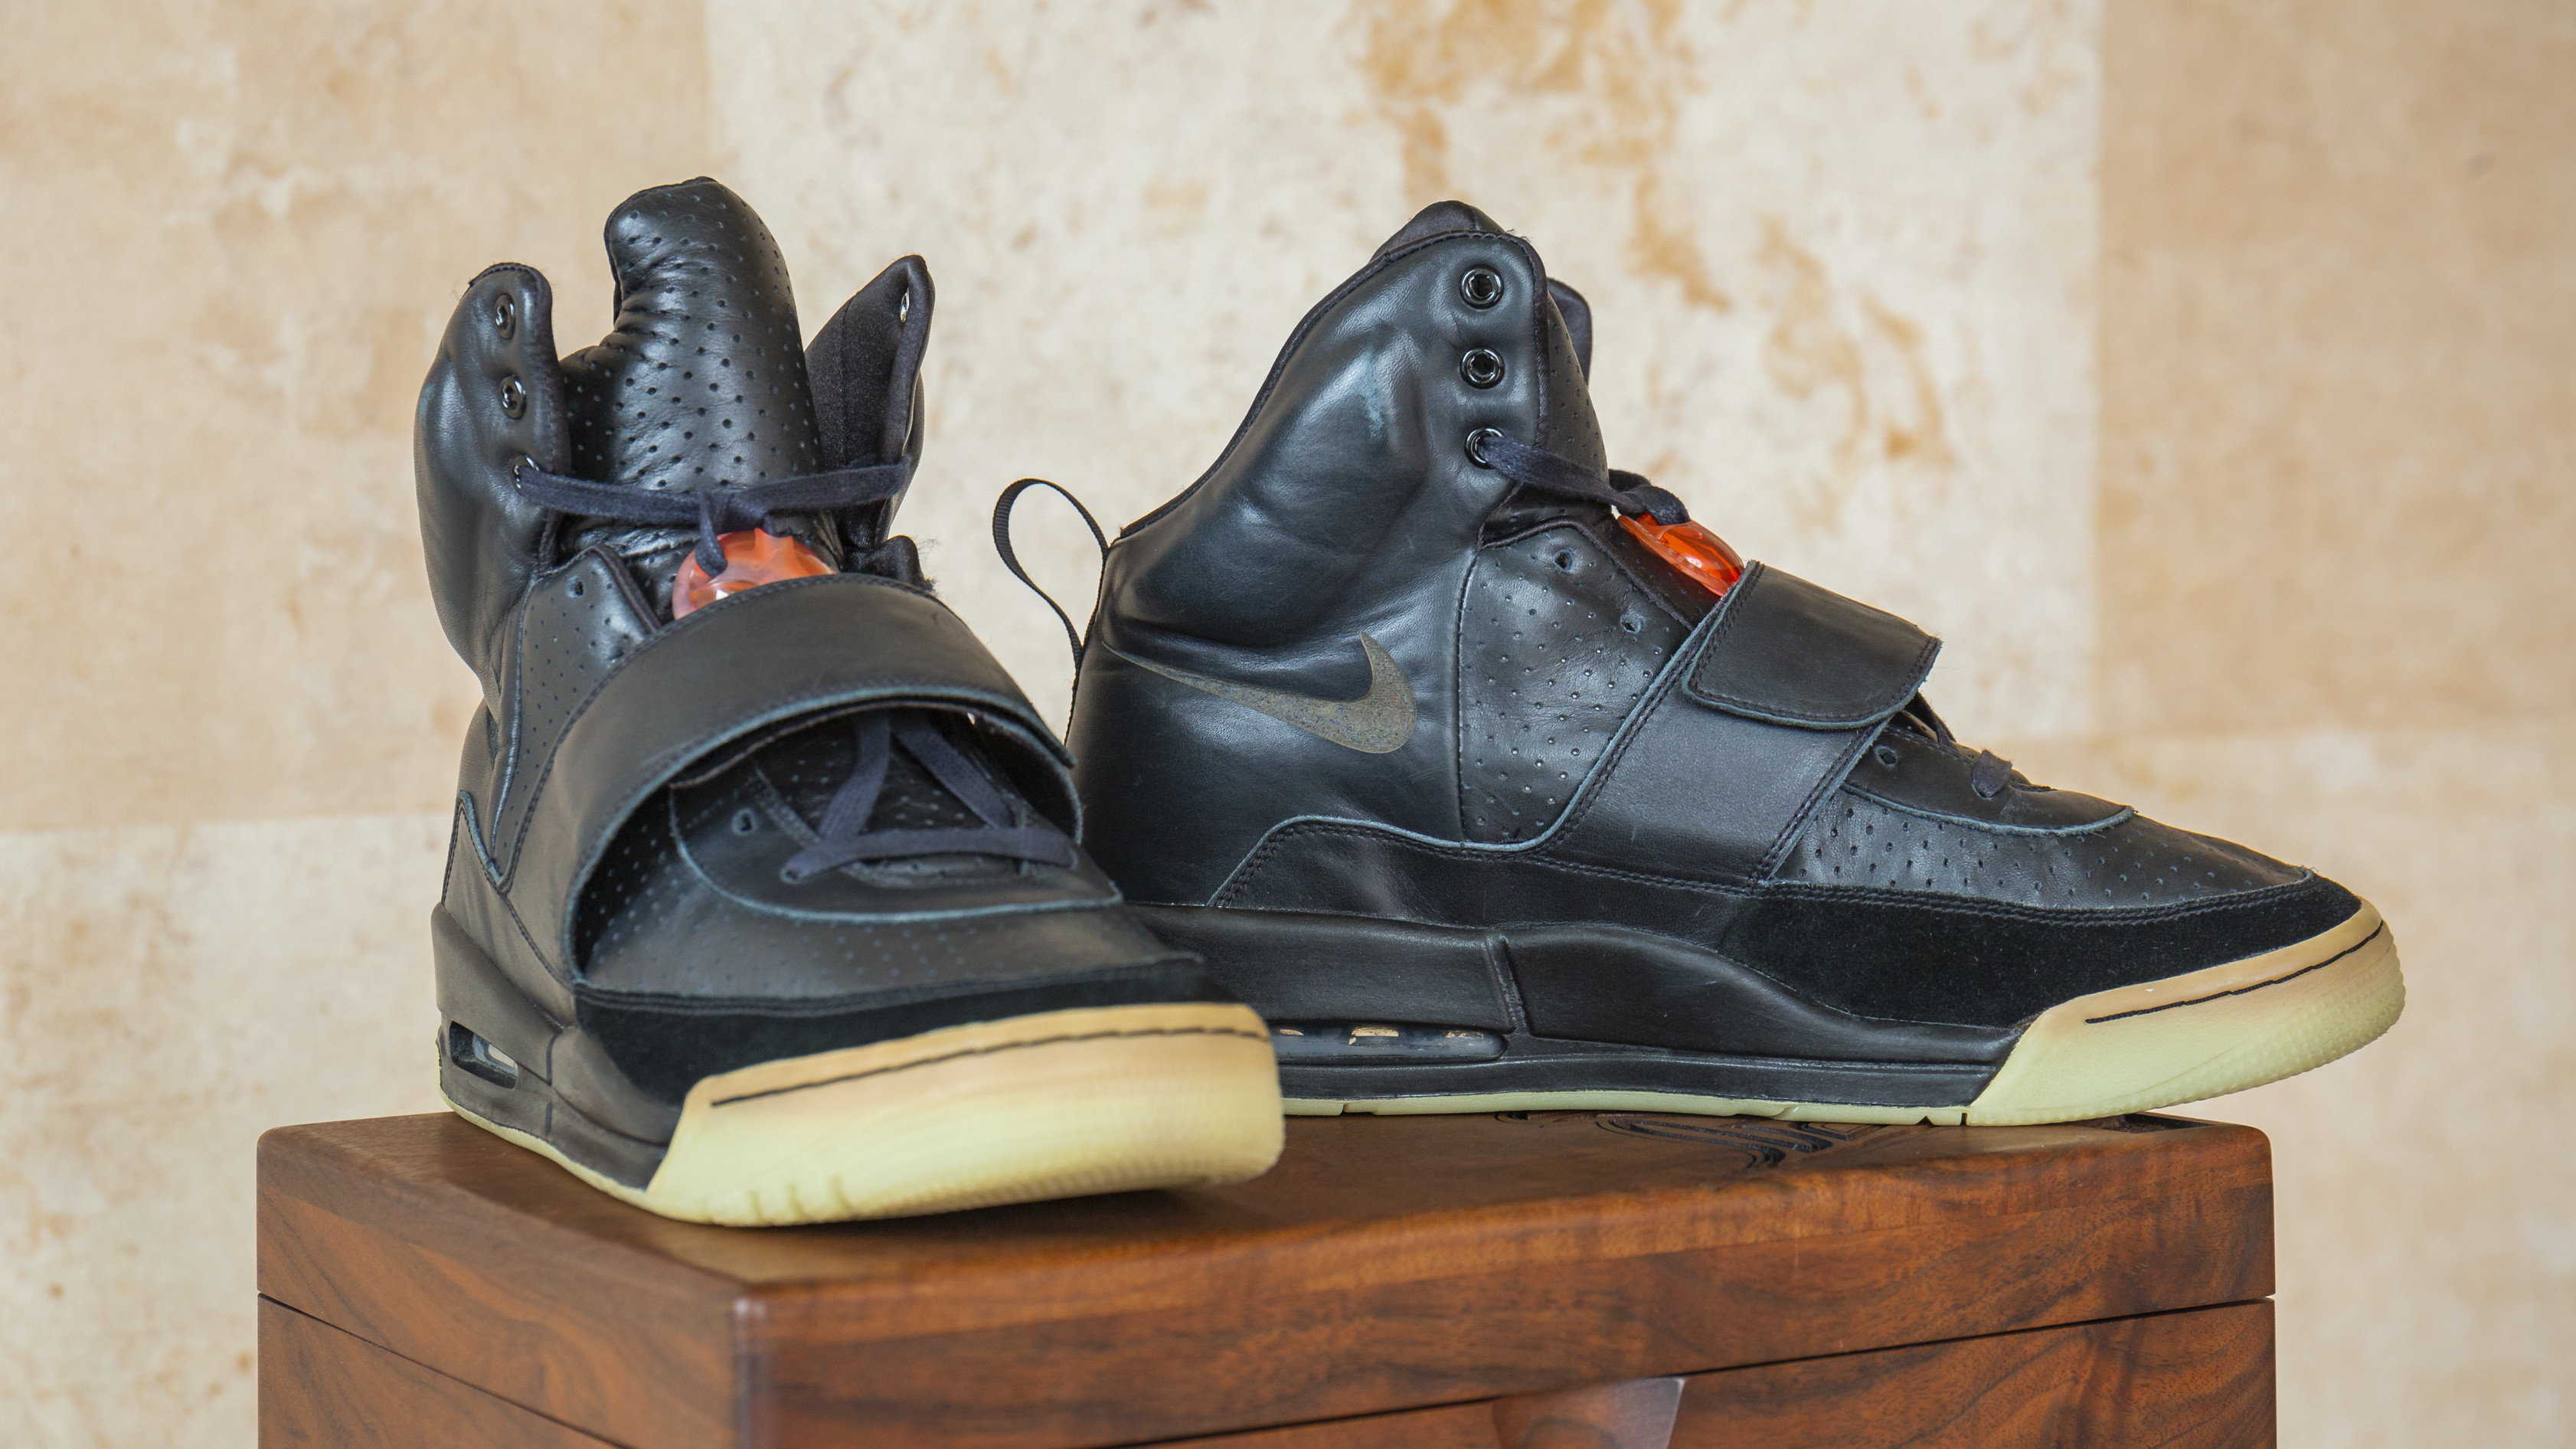 Nike Air Yeezy 1 Sample Sotheby's $1 Million | Sole